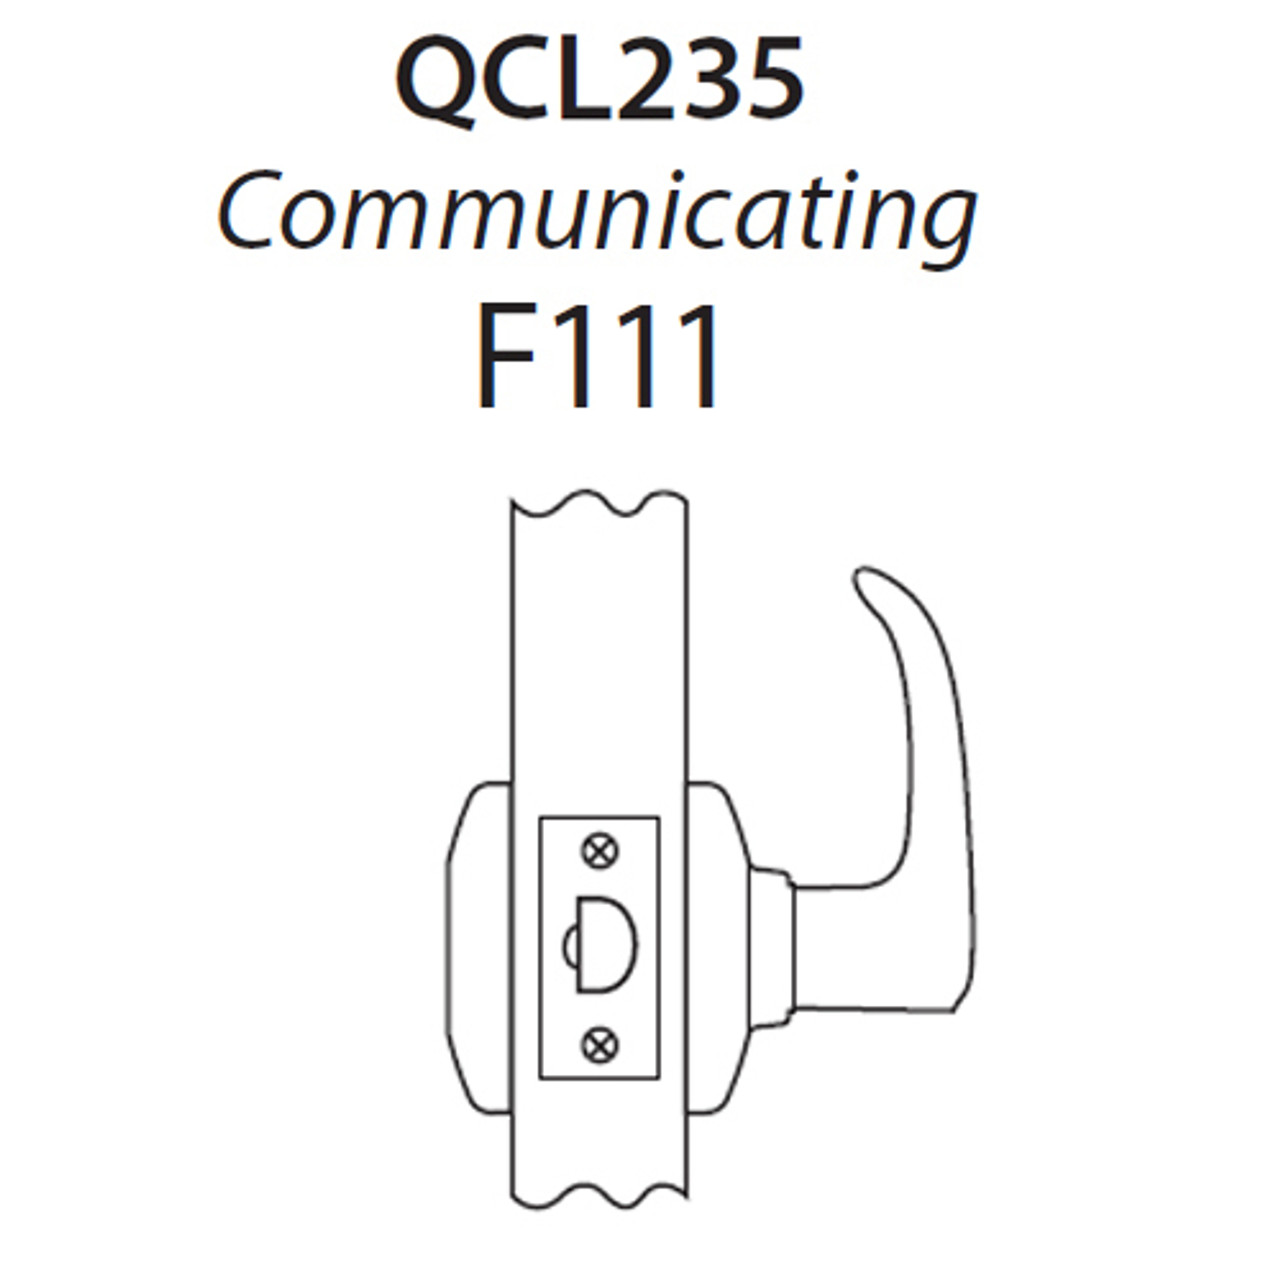 QCL235A625NOLNOS Stanley QCL200 Series Cylindrical Communicating Lock with Slate Lever in Bright Chrome Finish